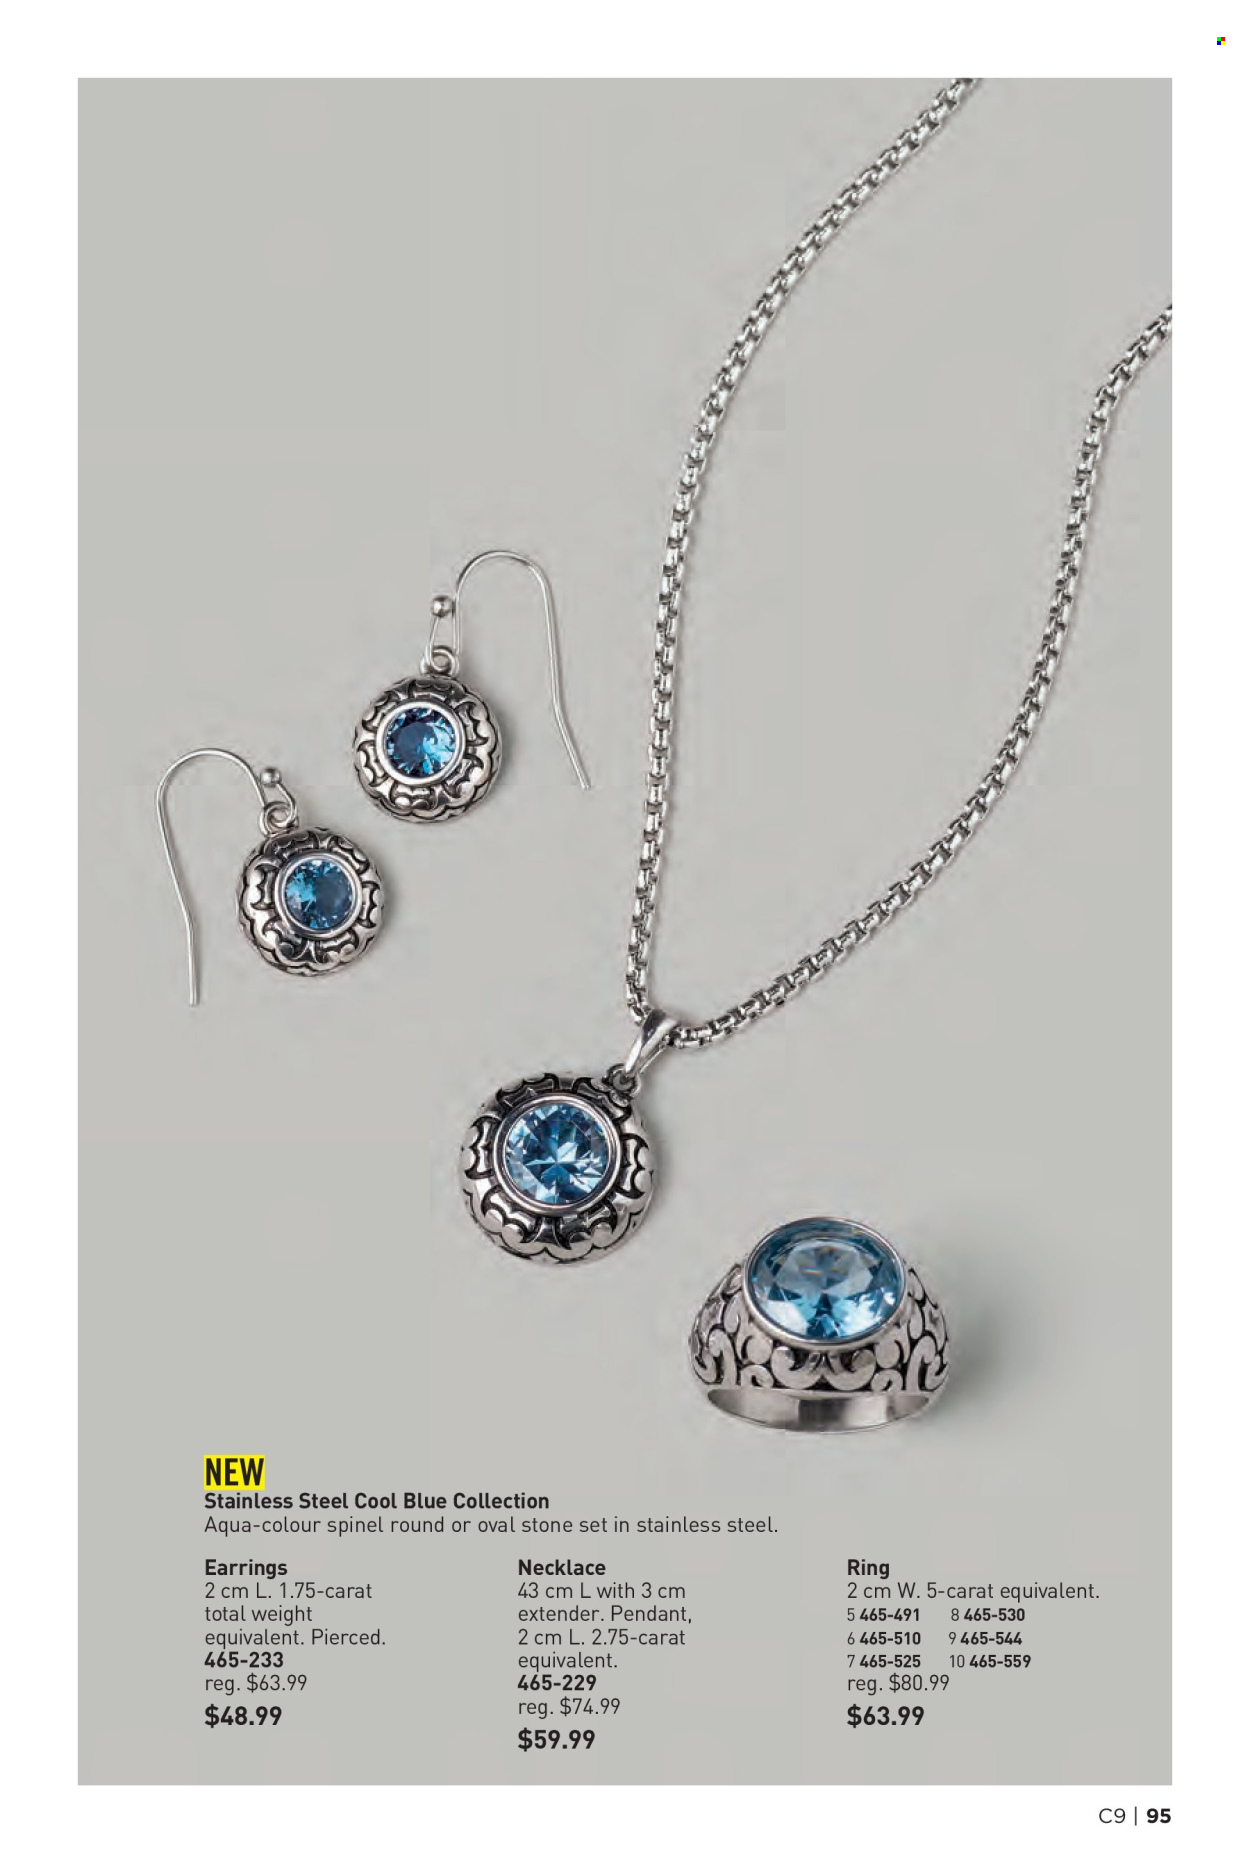 thumbnail - Avon Flyer - Sales products - earrings, necklace, pendant. Page 95.